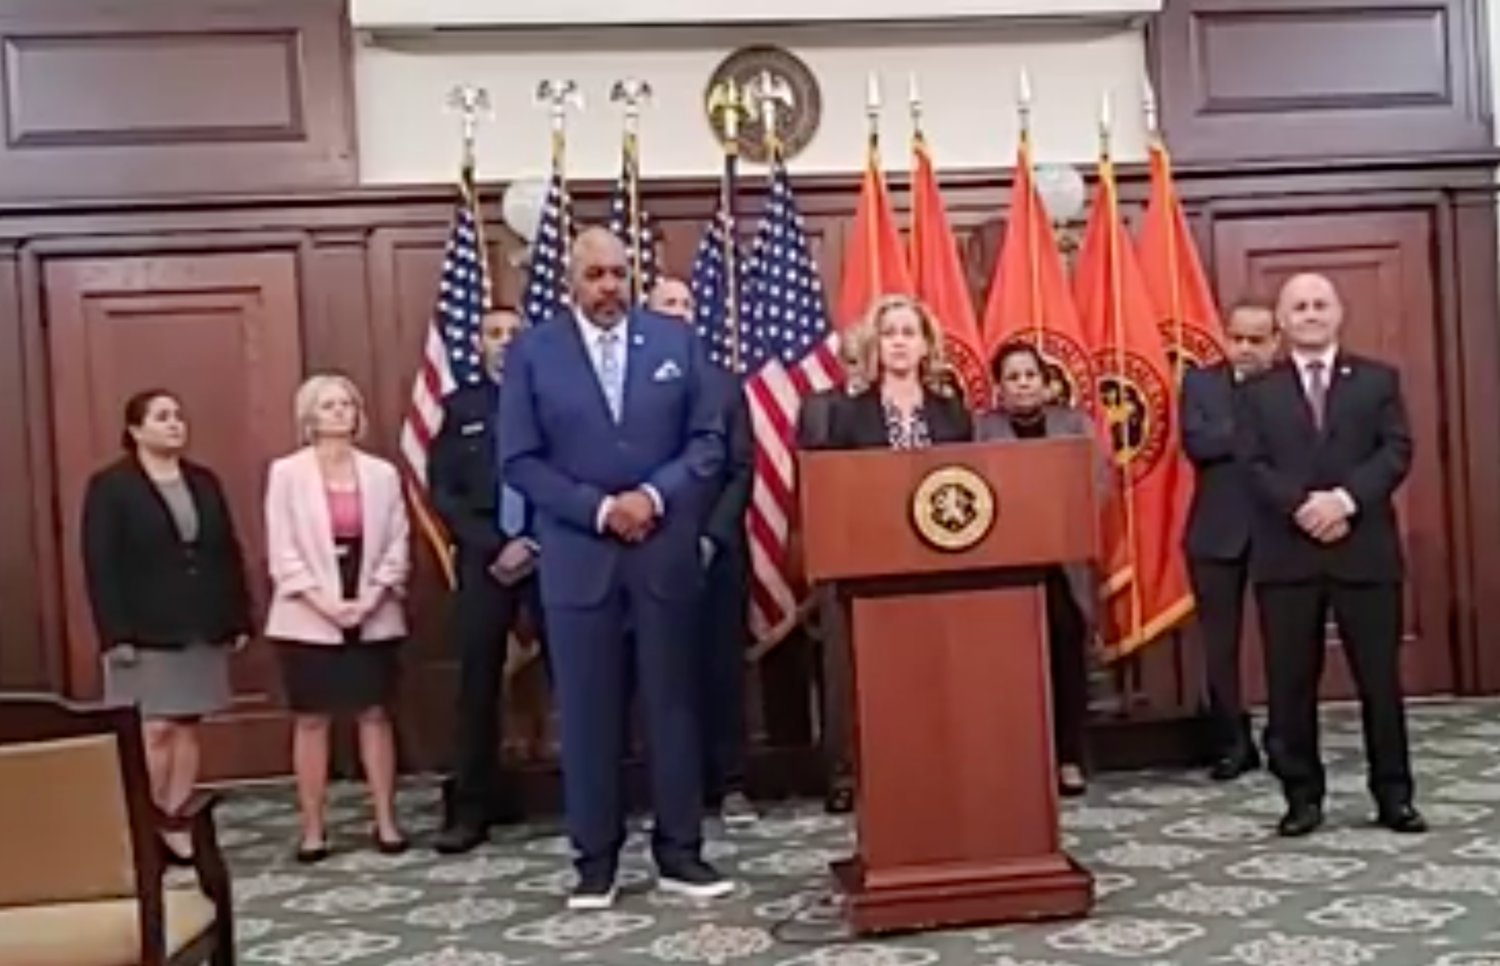 Bishop Lionel Harvey, center, joins Nassau County Executive Laura Curran, at lectern, who announced the creation of a new police diversity committee.